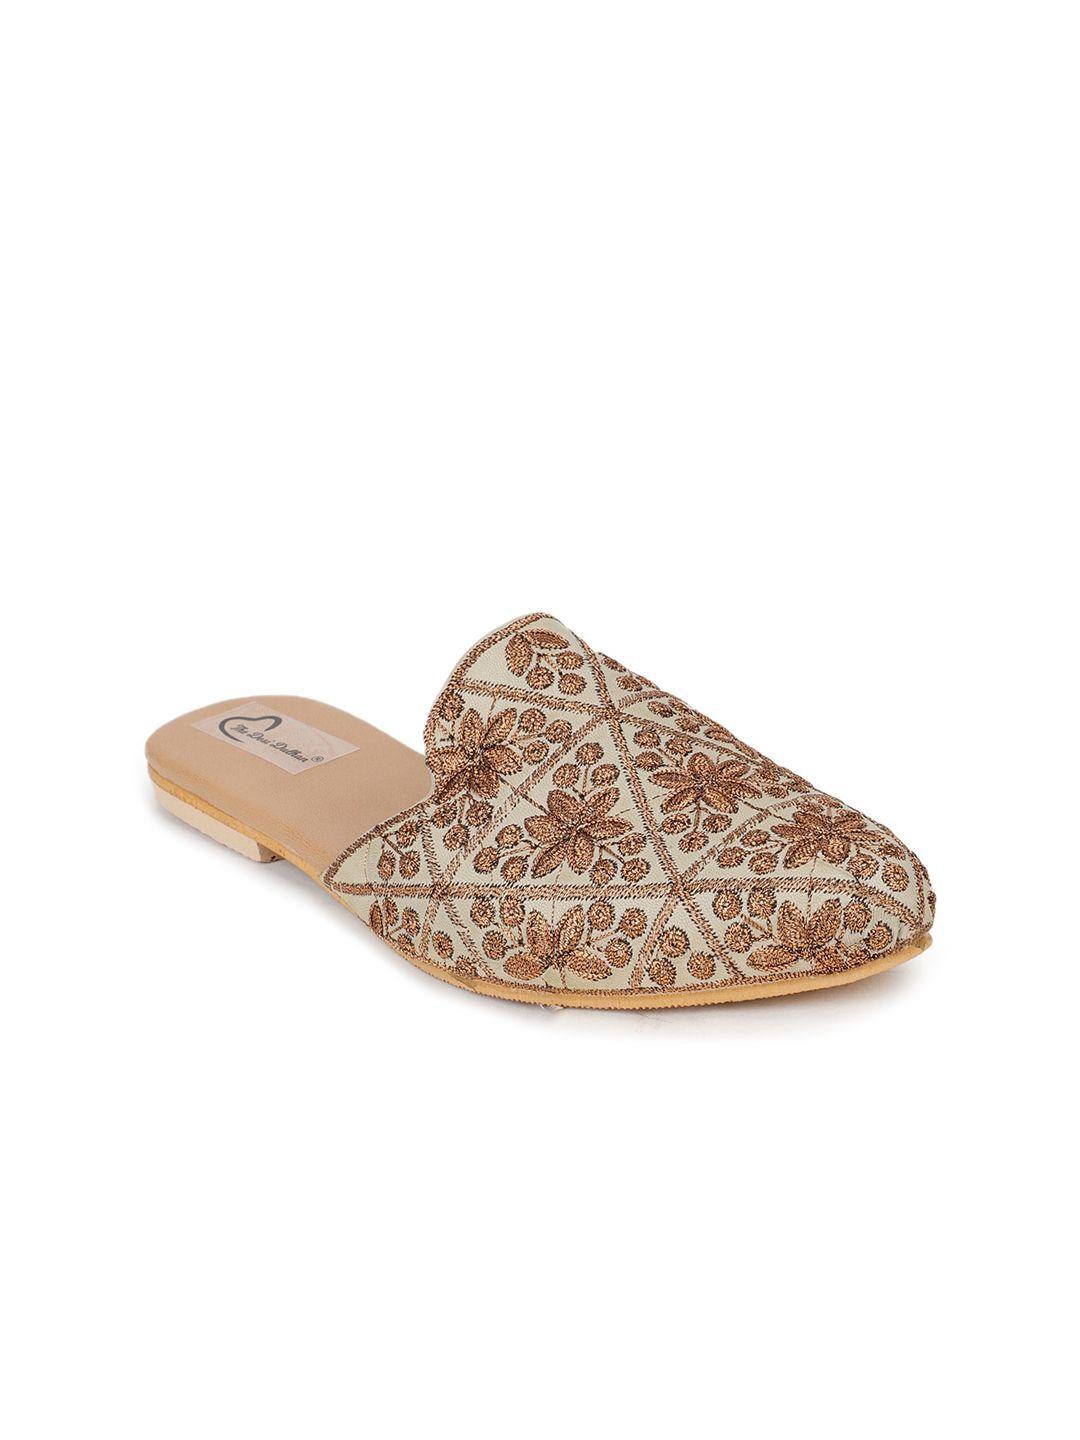 the-desi-dulhan-women-copper-toned-embellished-leather-ethnic-flats